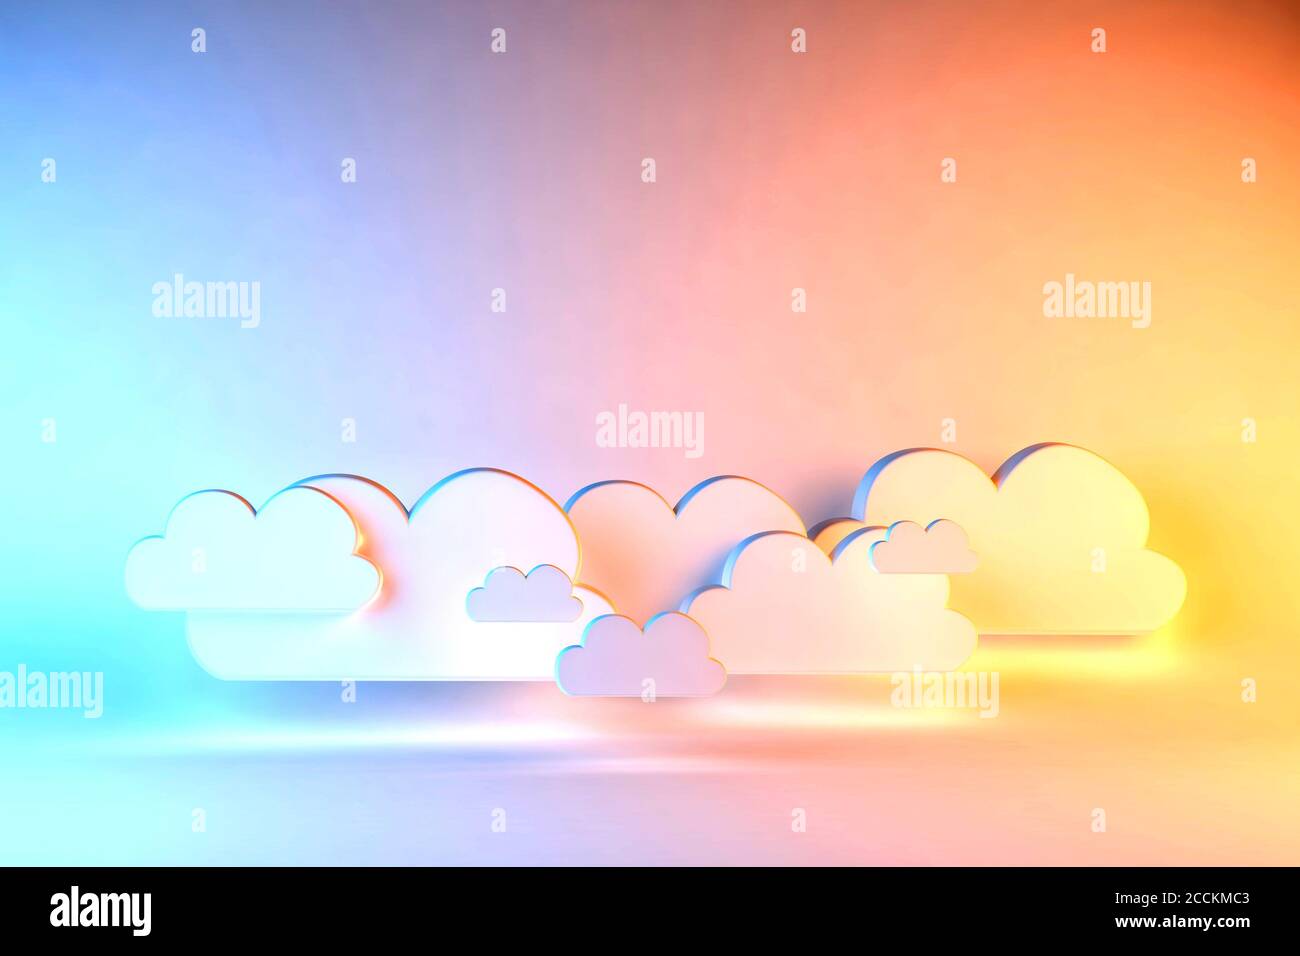 3d illustration render concepts of CLOUDS ON A RAINBOW background Stock Photo